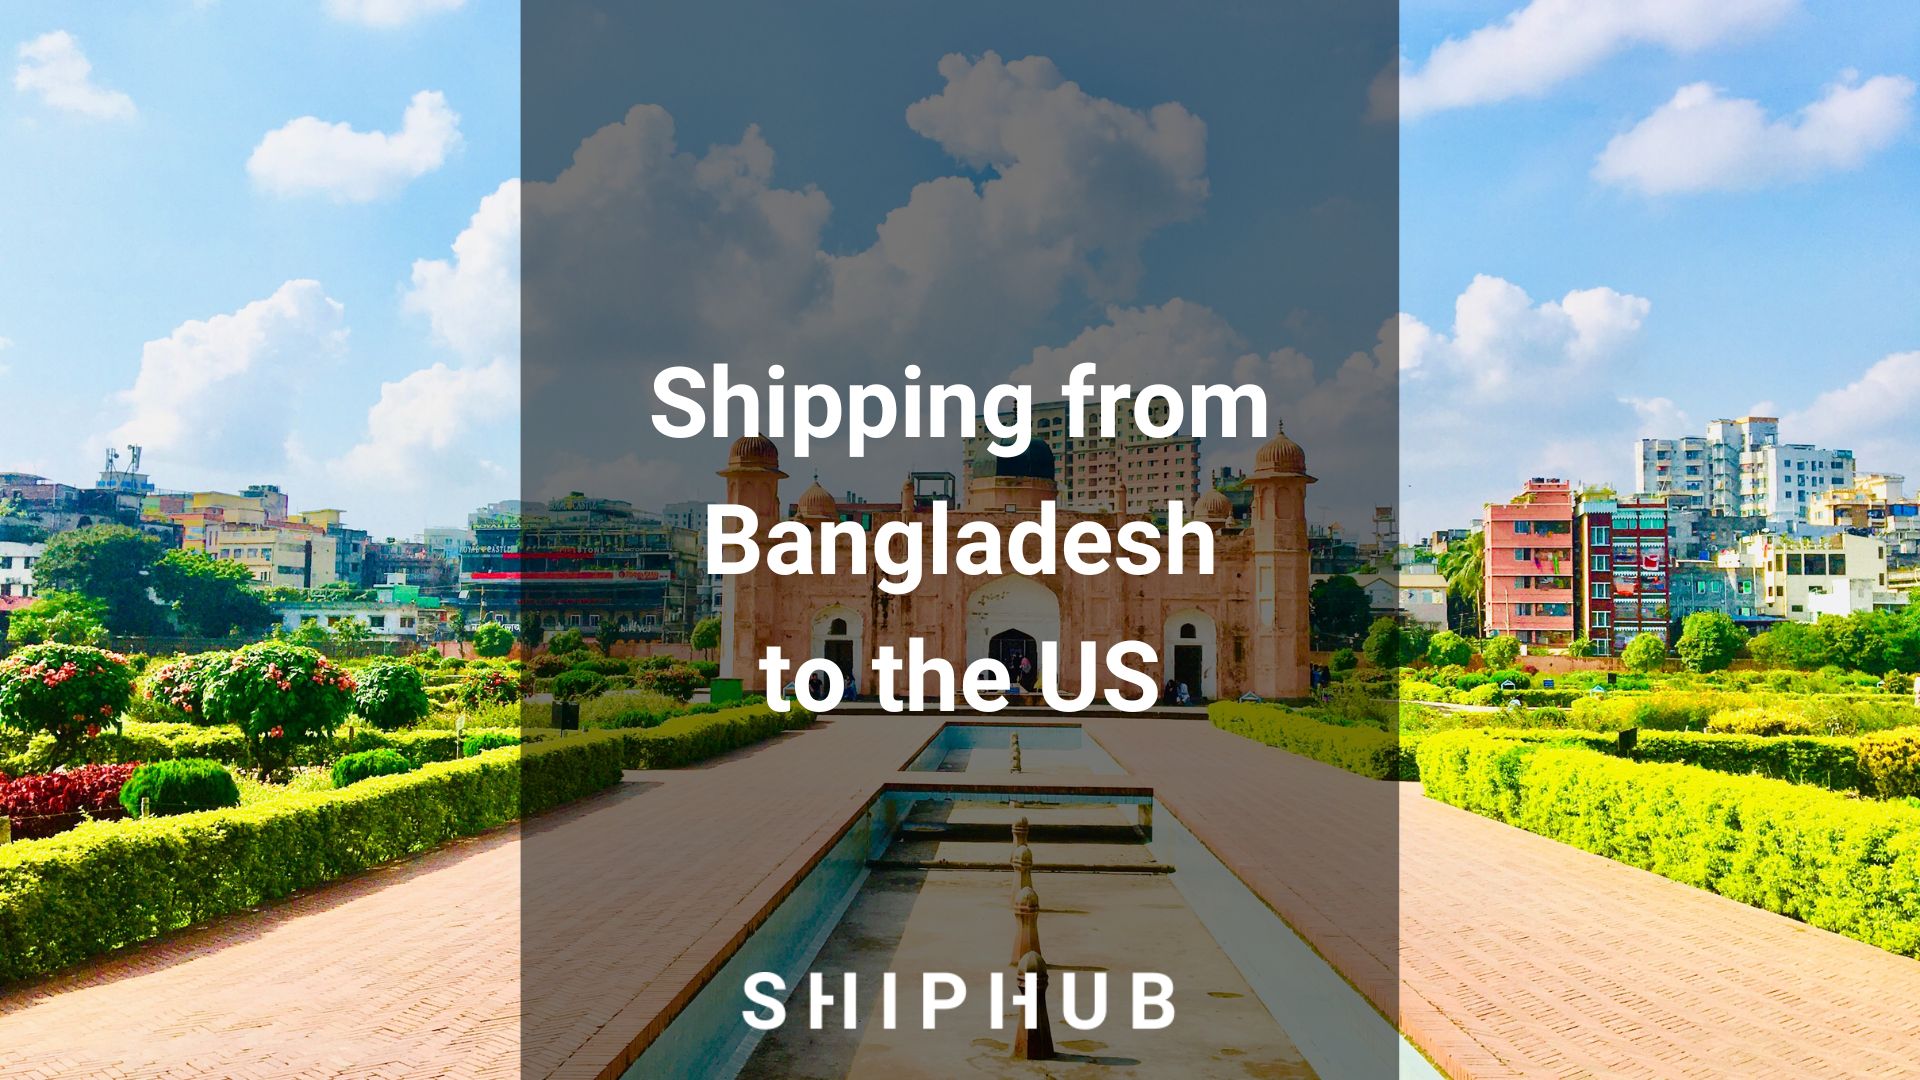 Shipping from Bangladesh to the US